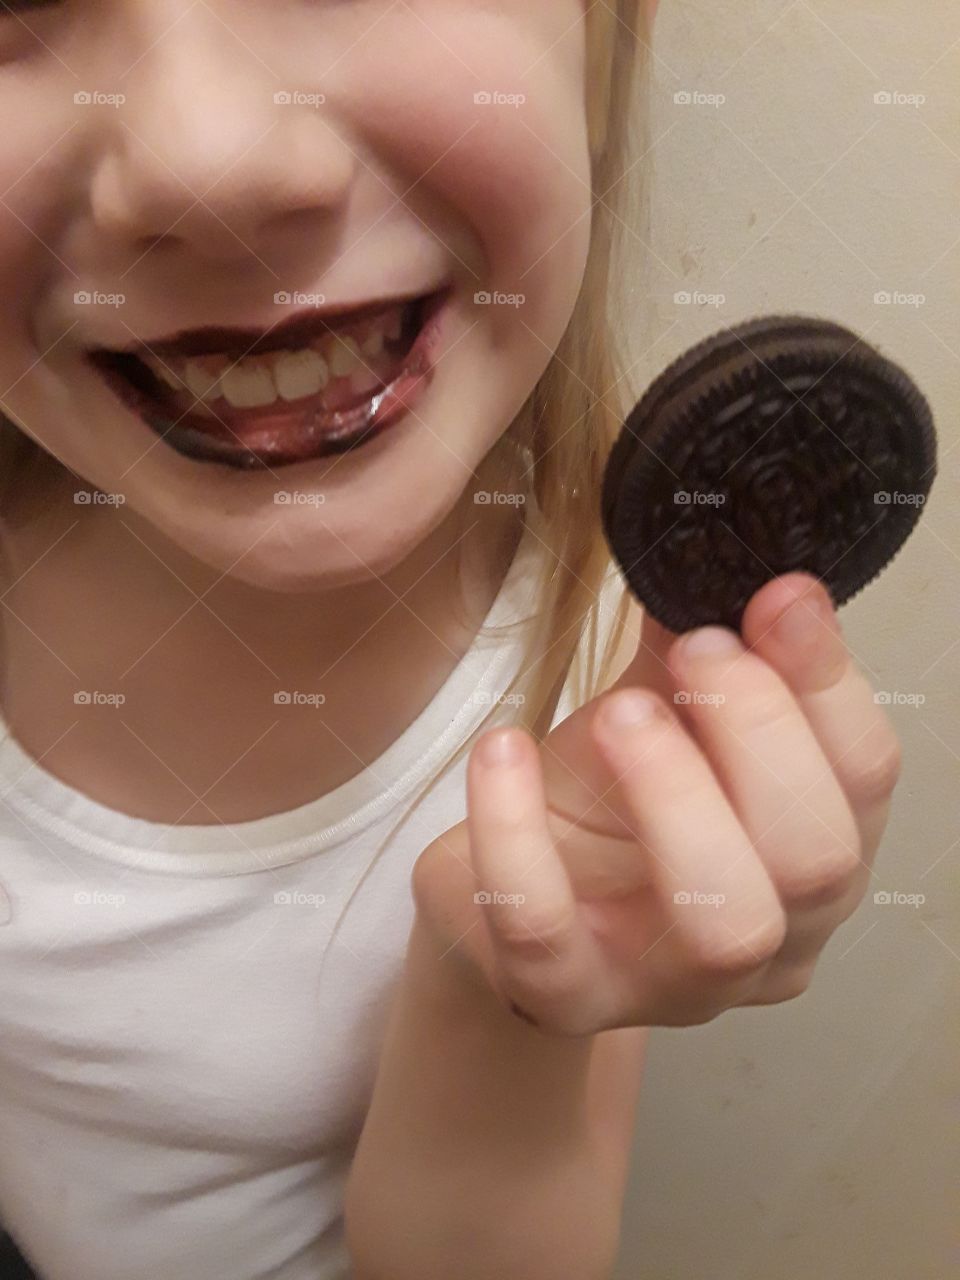 Smiling Gurl Holding Oreo Cookie